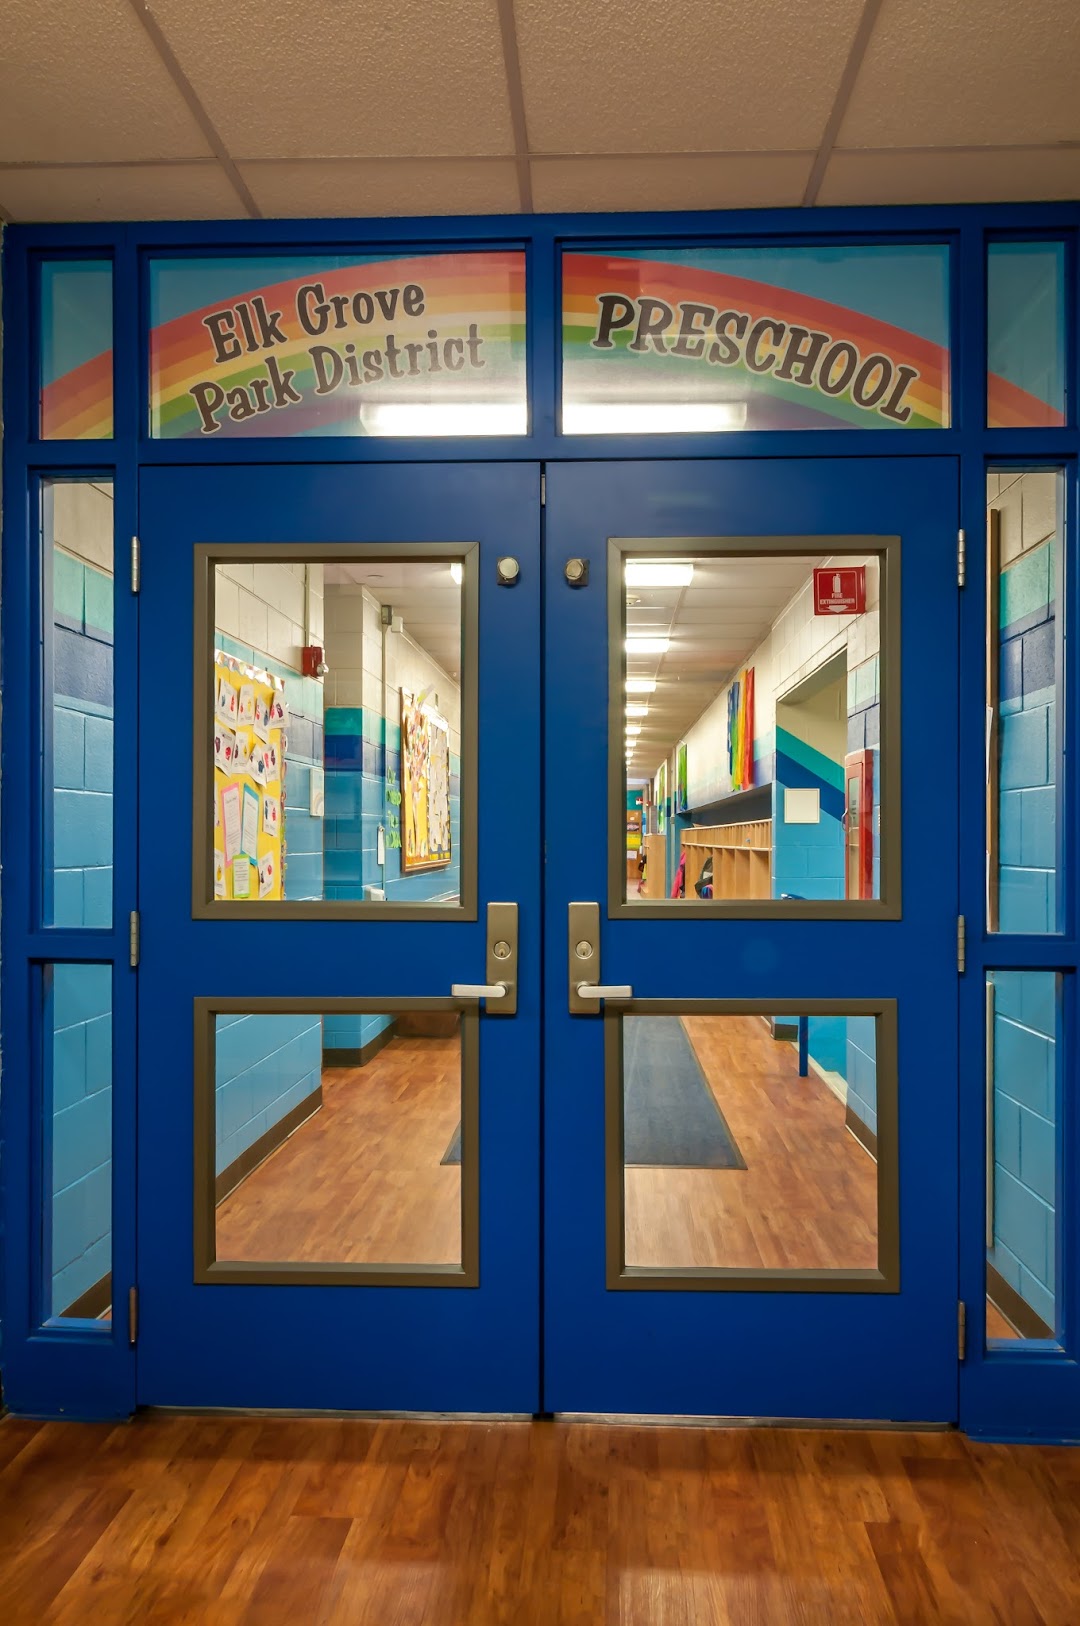 Elk Grove Park District Preschool and Early Childhood Center